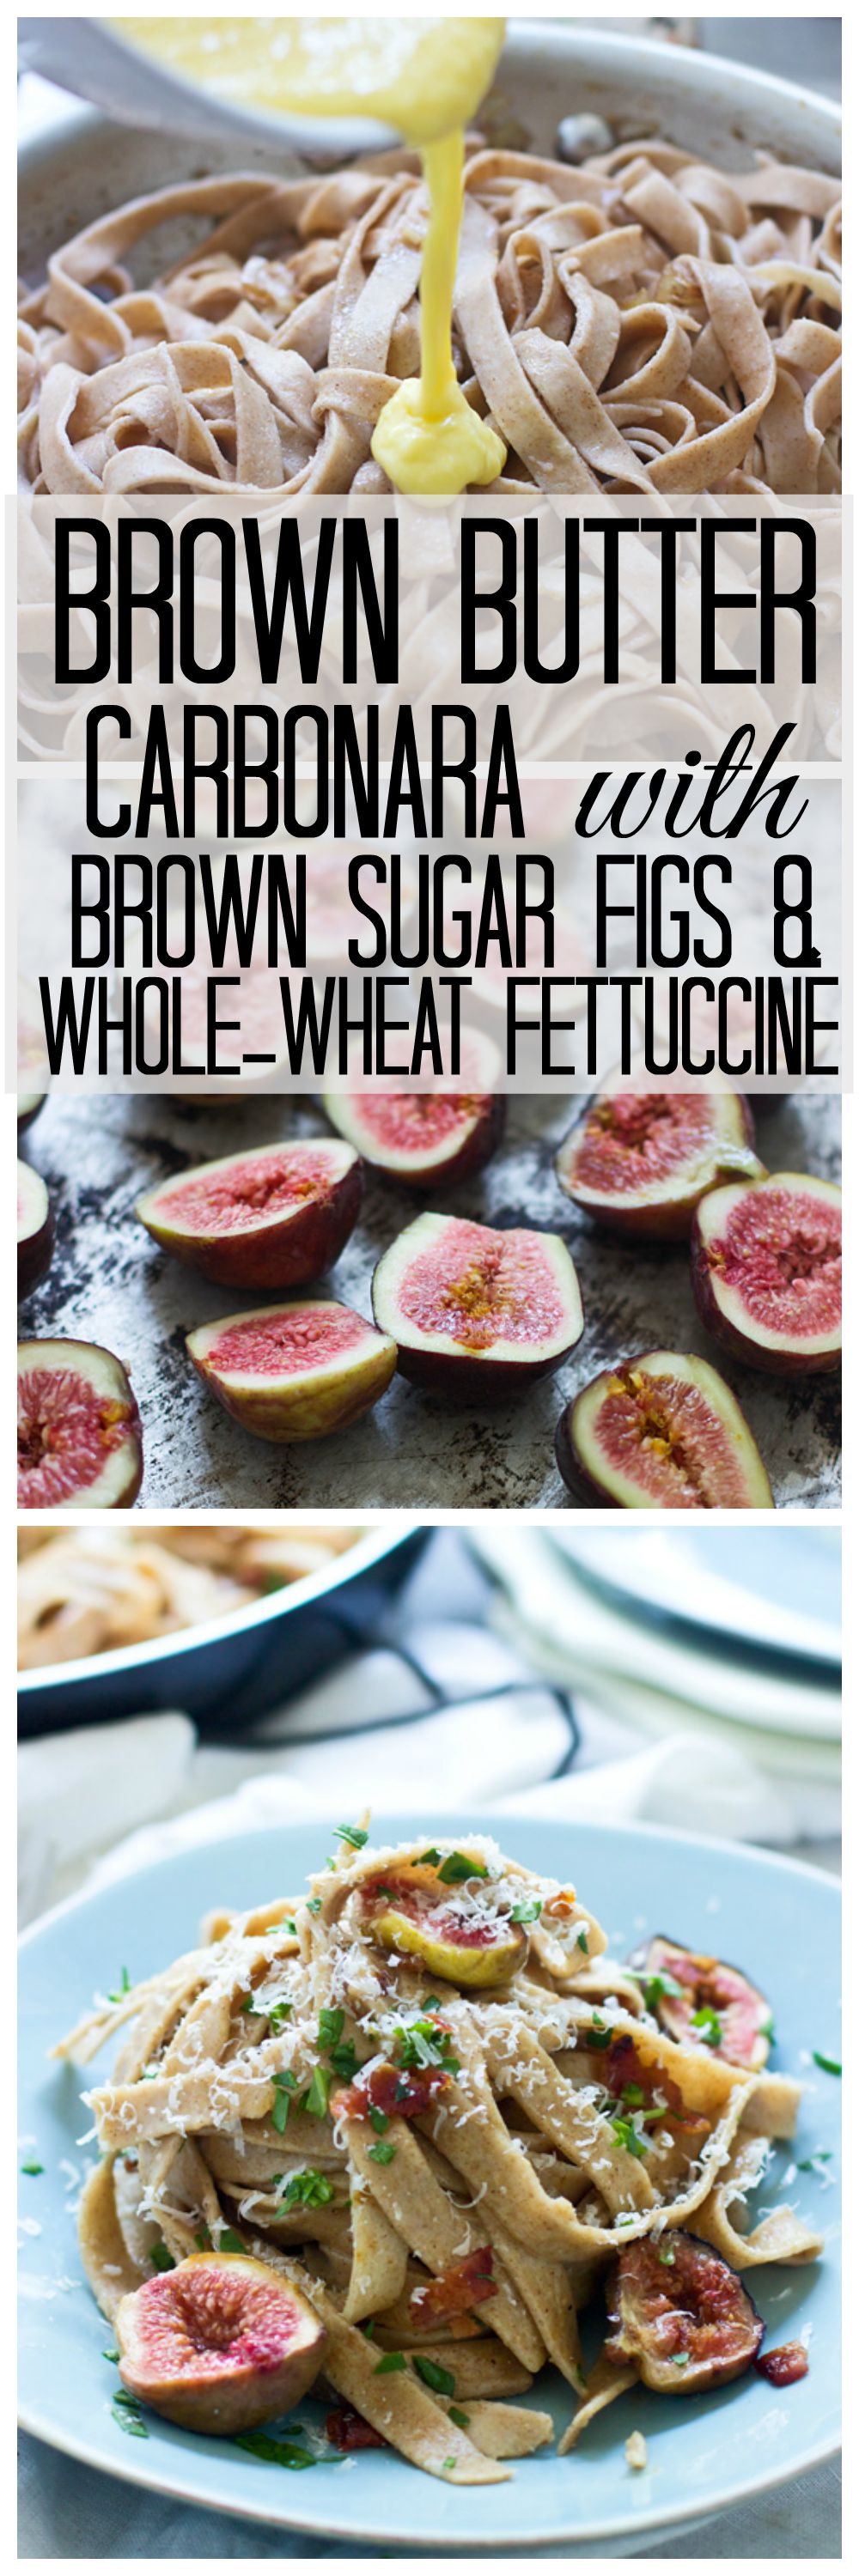 Impress guests with this Brown Butter Carbonara with Brown Sugar Roasted Figs and Whole-Wheat Fettuccine -- elegant, easy and so delish! 